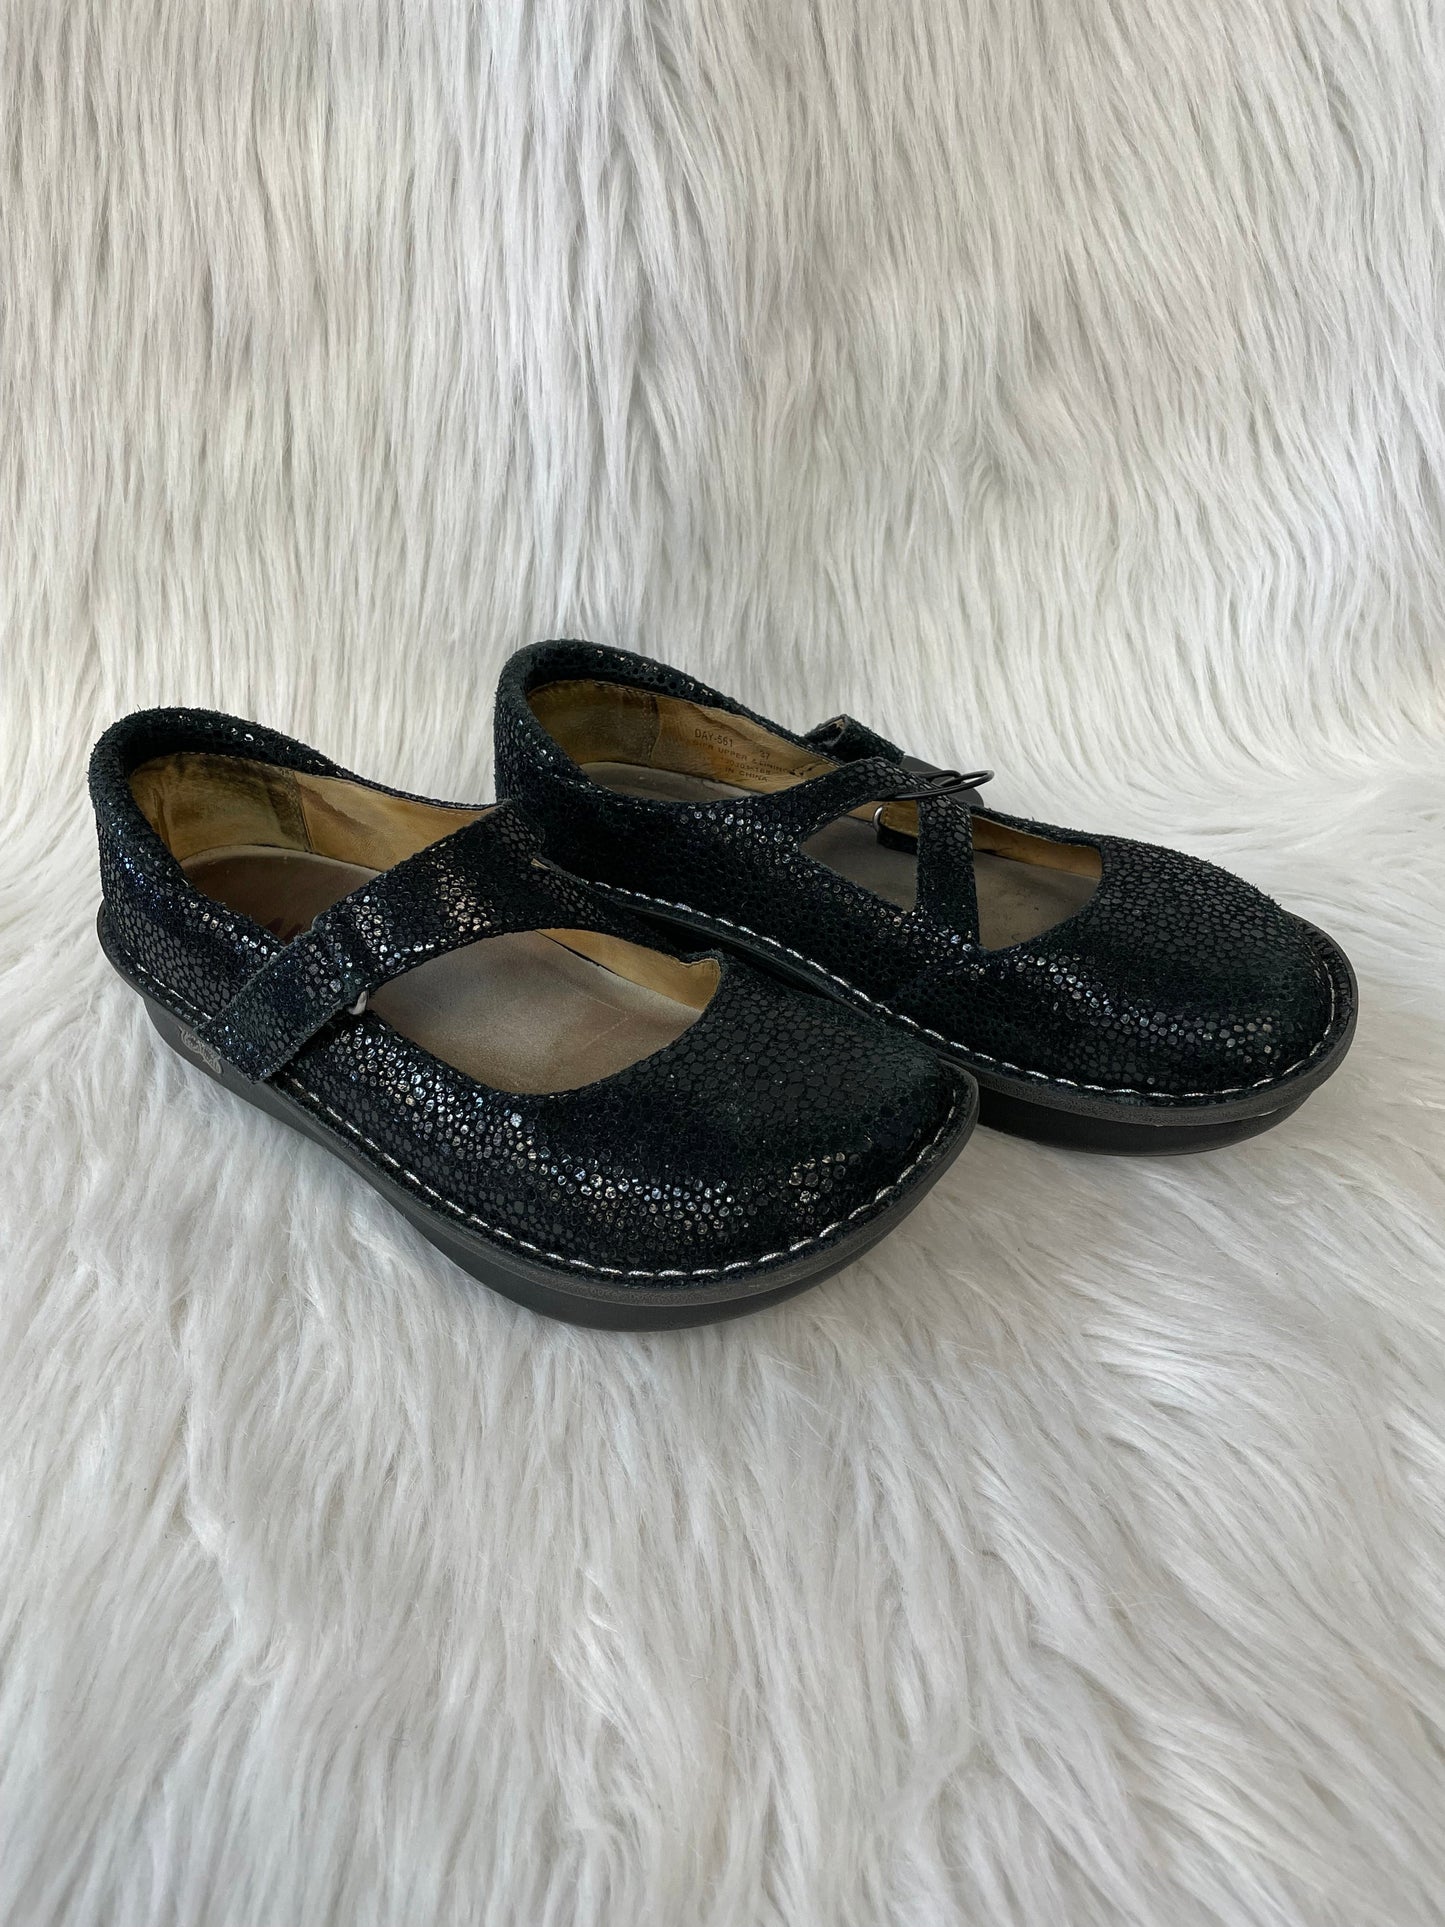 Black Shoes Flats Other Alegria, Size 6.5